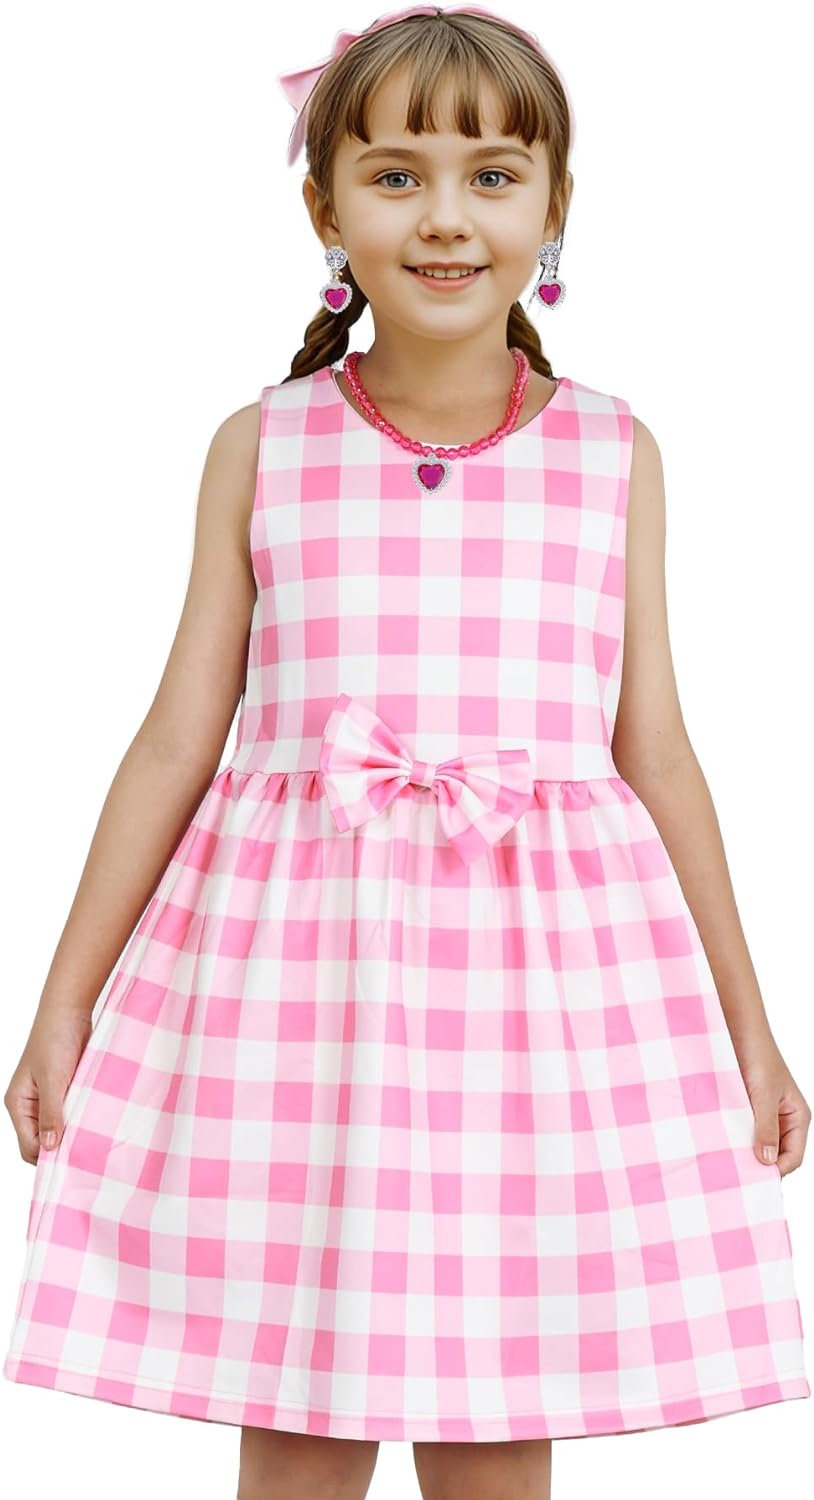 Pink Dresses for Kids Pink Costume Set Vintage Dress Up with Accessories - Cykapu